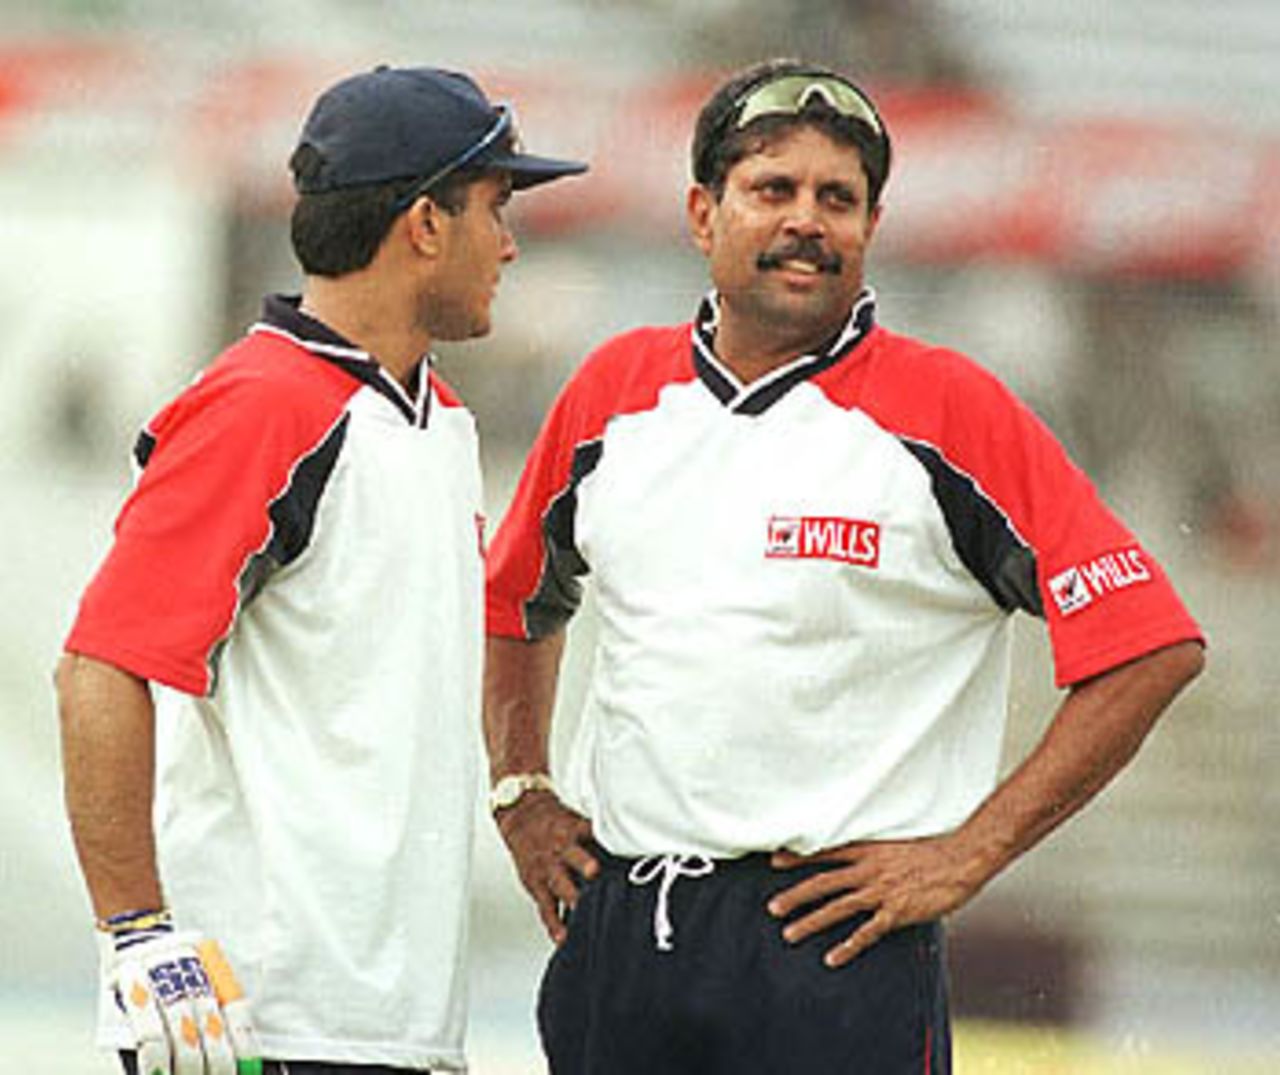 Indian coach Kapil Dev along with Ganguly at the nets, Asia Cup, 1999/00, Dhaka